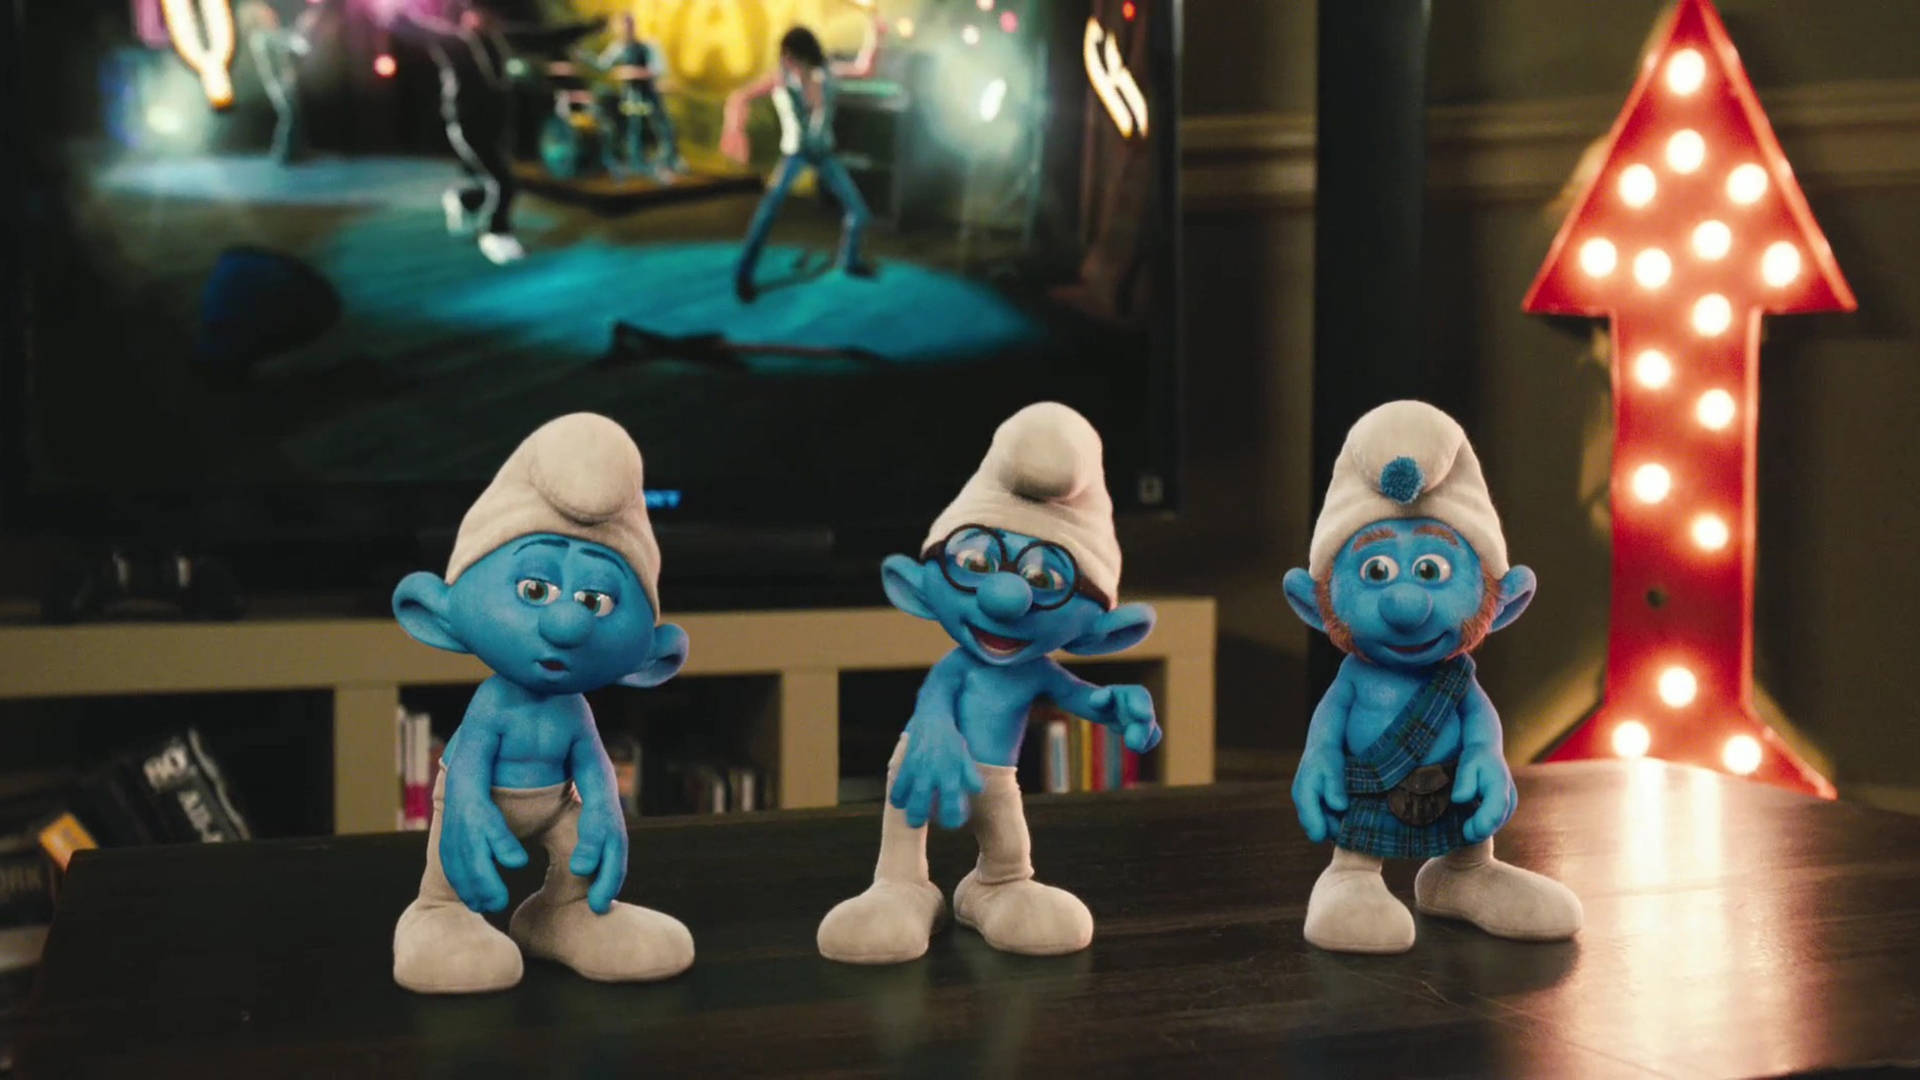 The Smurfs Live Action